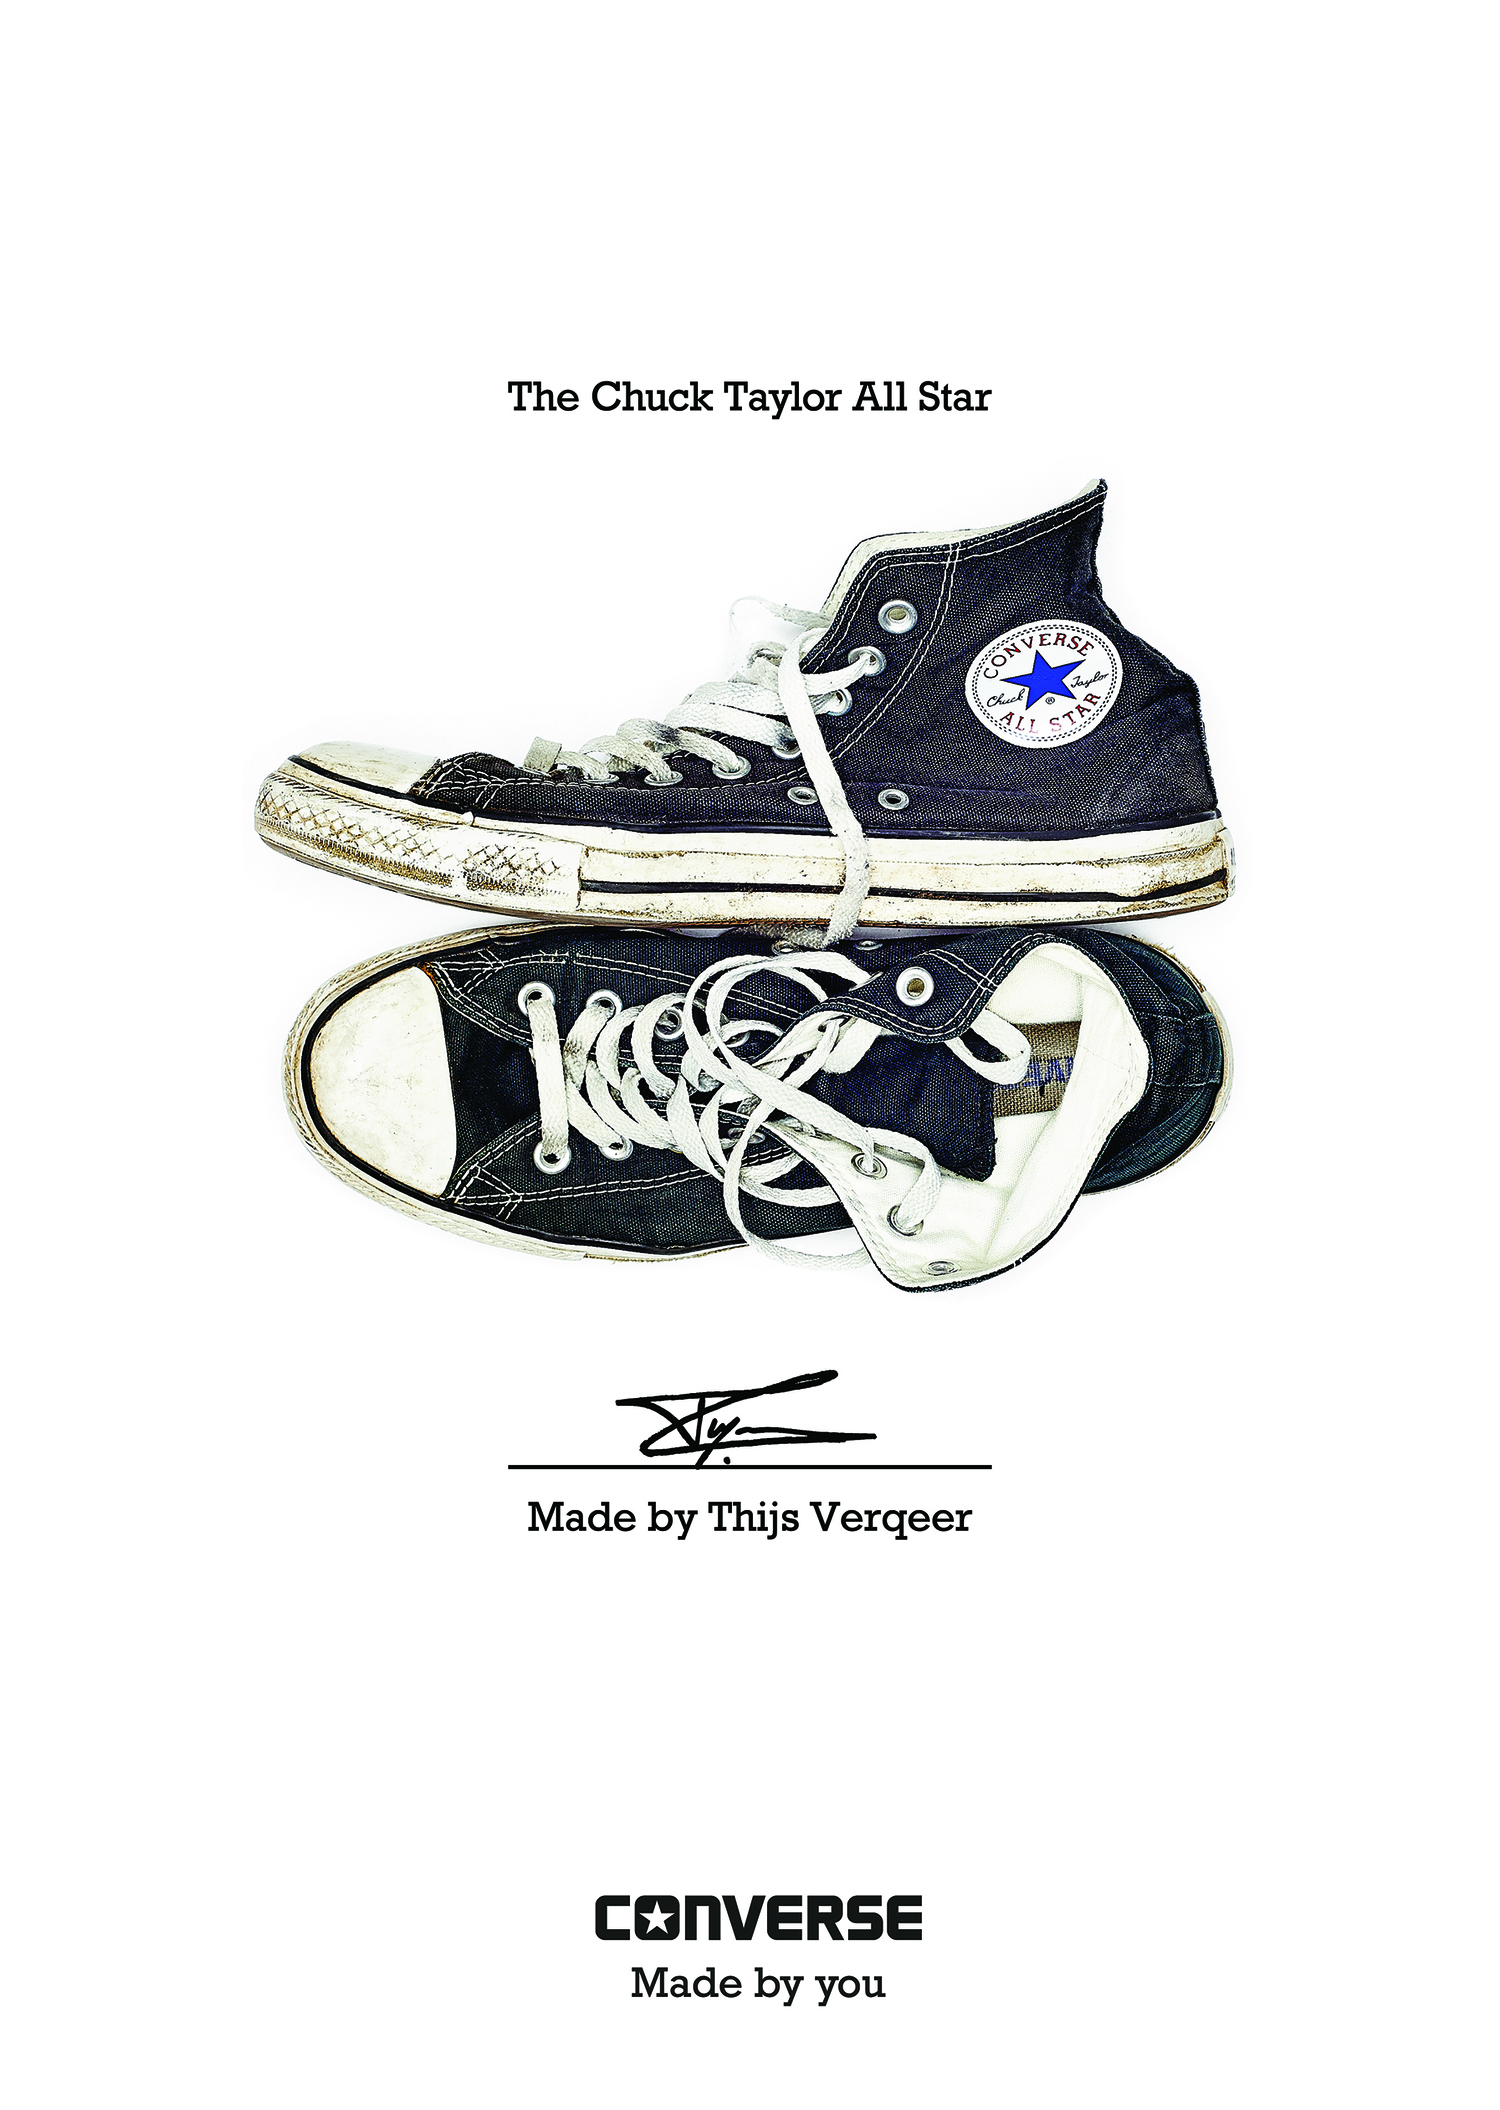 CONVERSE - MADE BY YOU — KIND